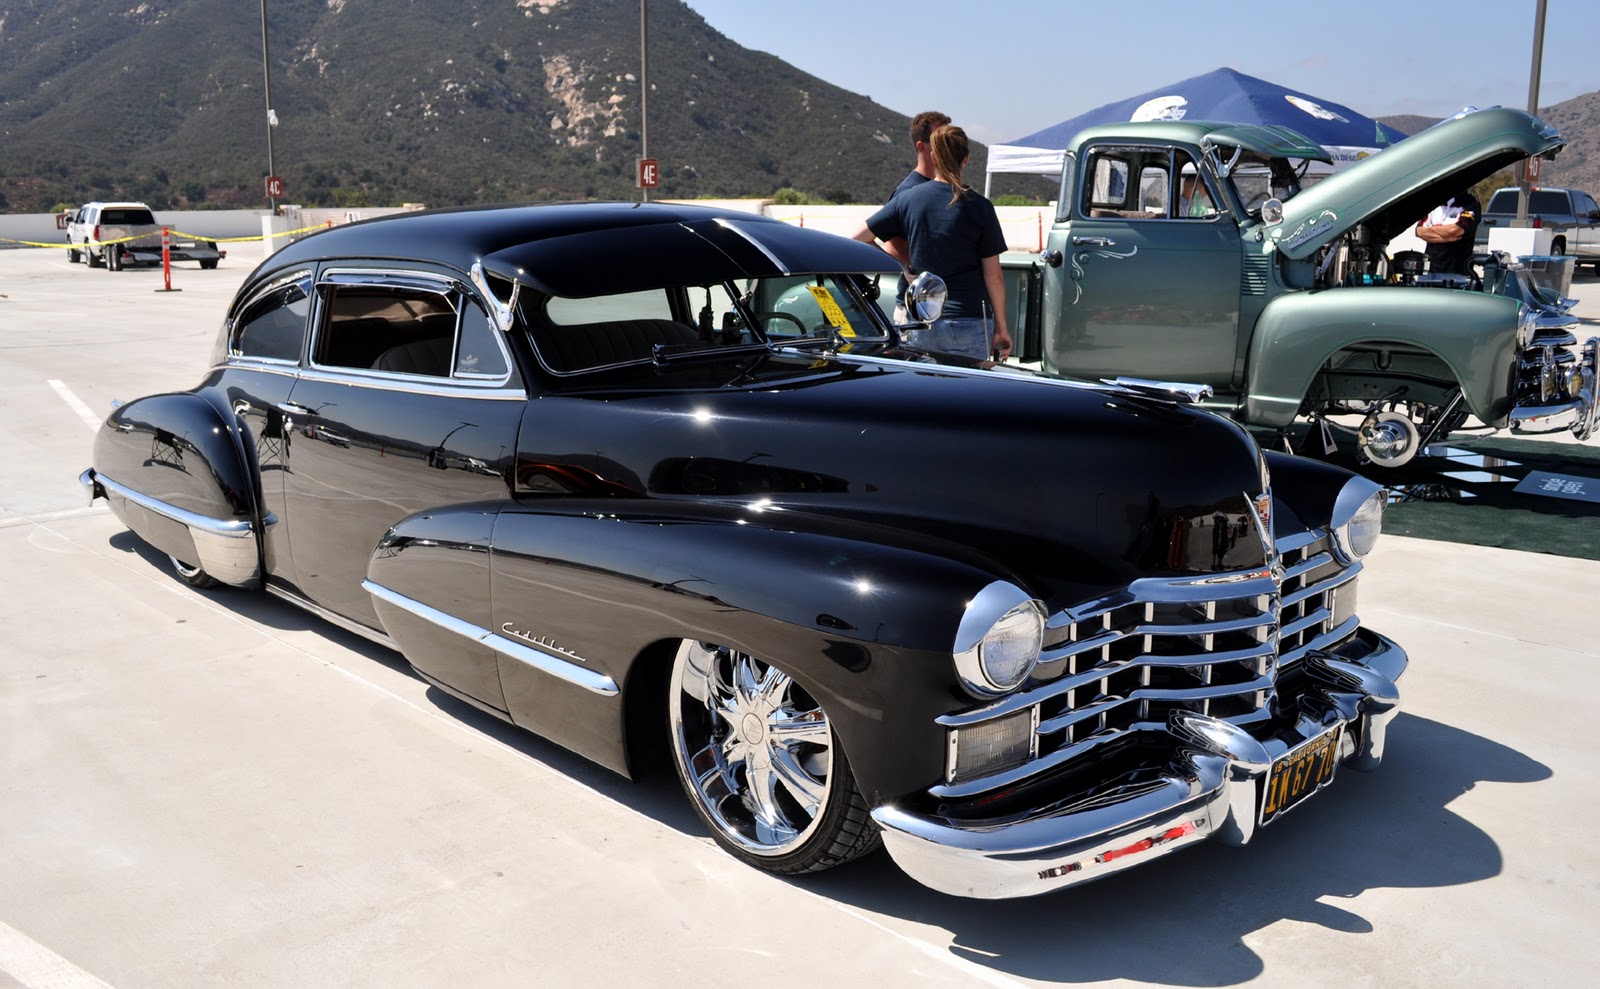 Zz Top Car Collection - Just A Car Guy: Pala Casino hosted a car show, 4th ...